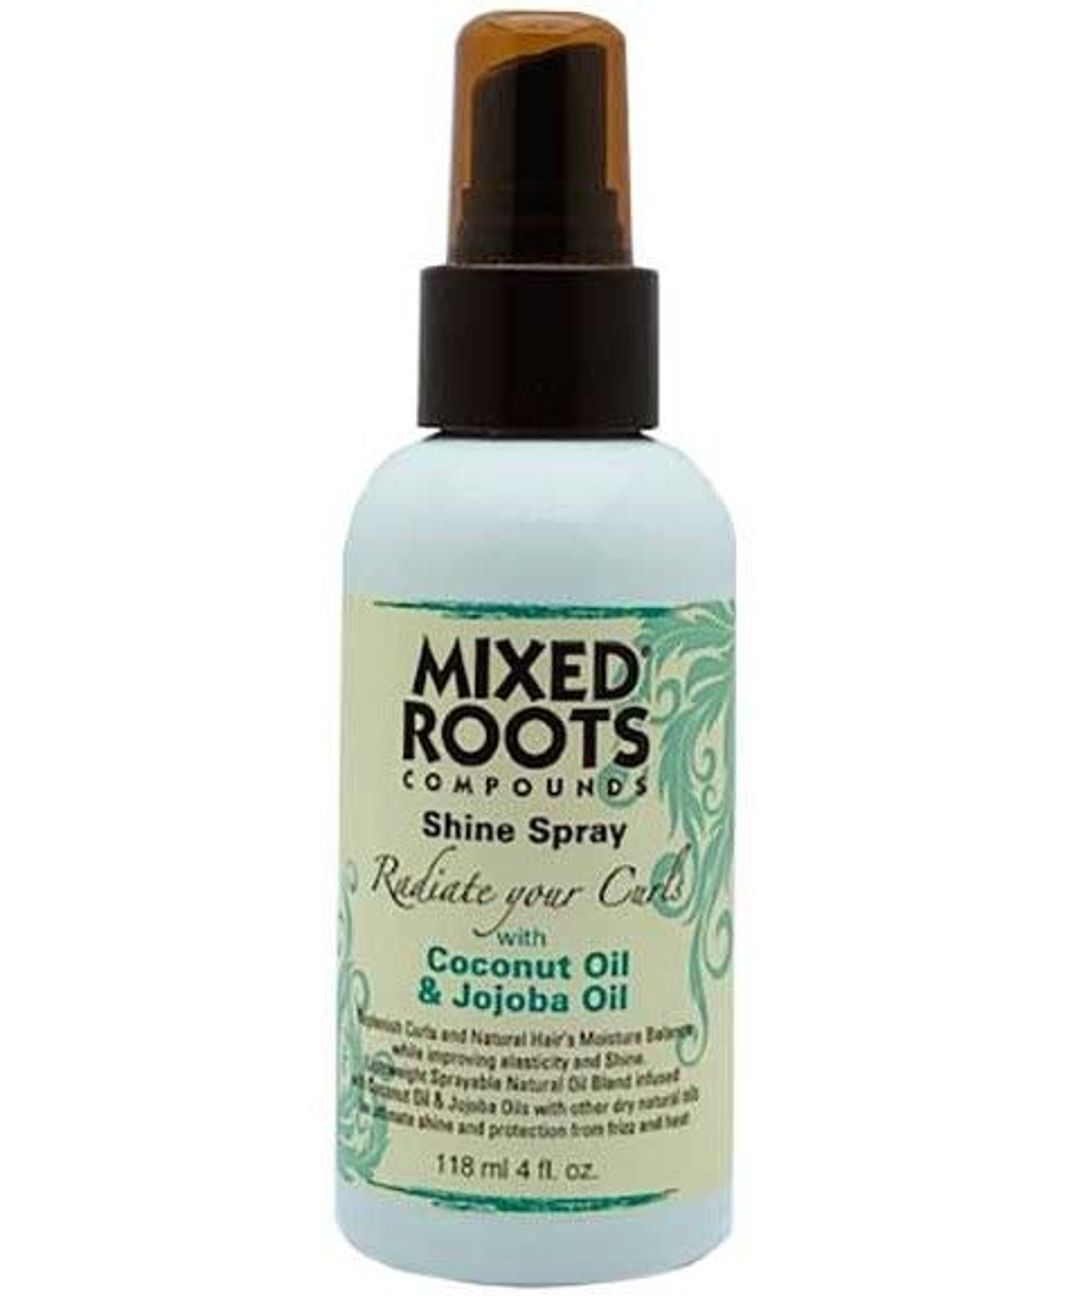 Mixed Roots - Compounds Shine Spray With Coconut Oil & Jojoba Oil 118ml